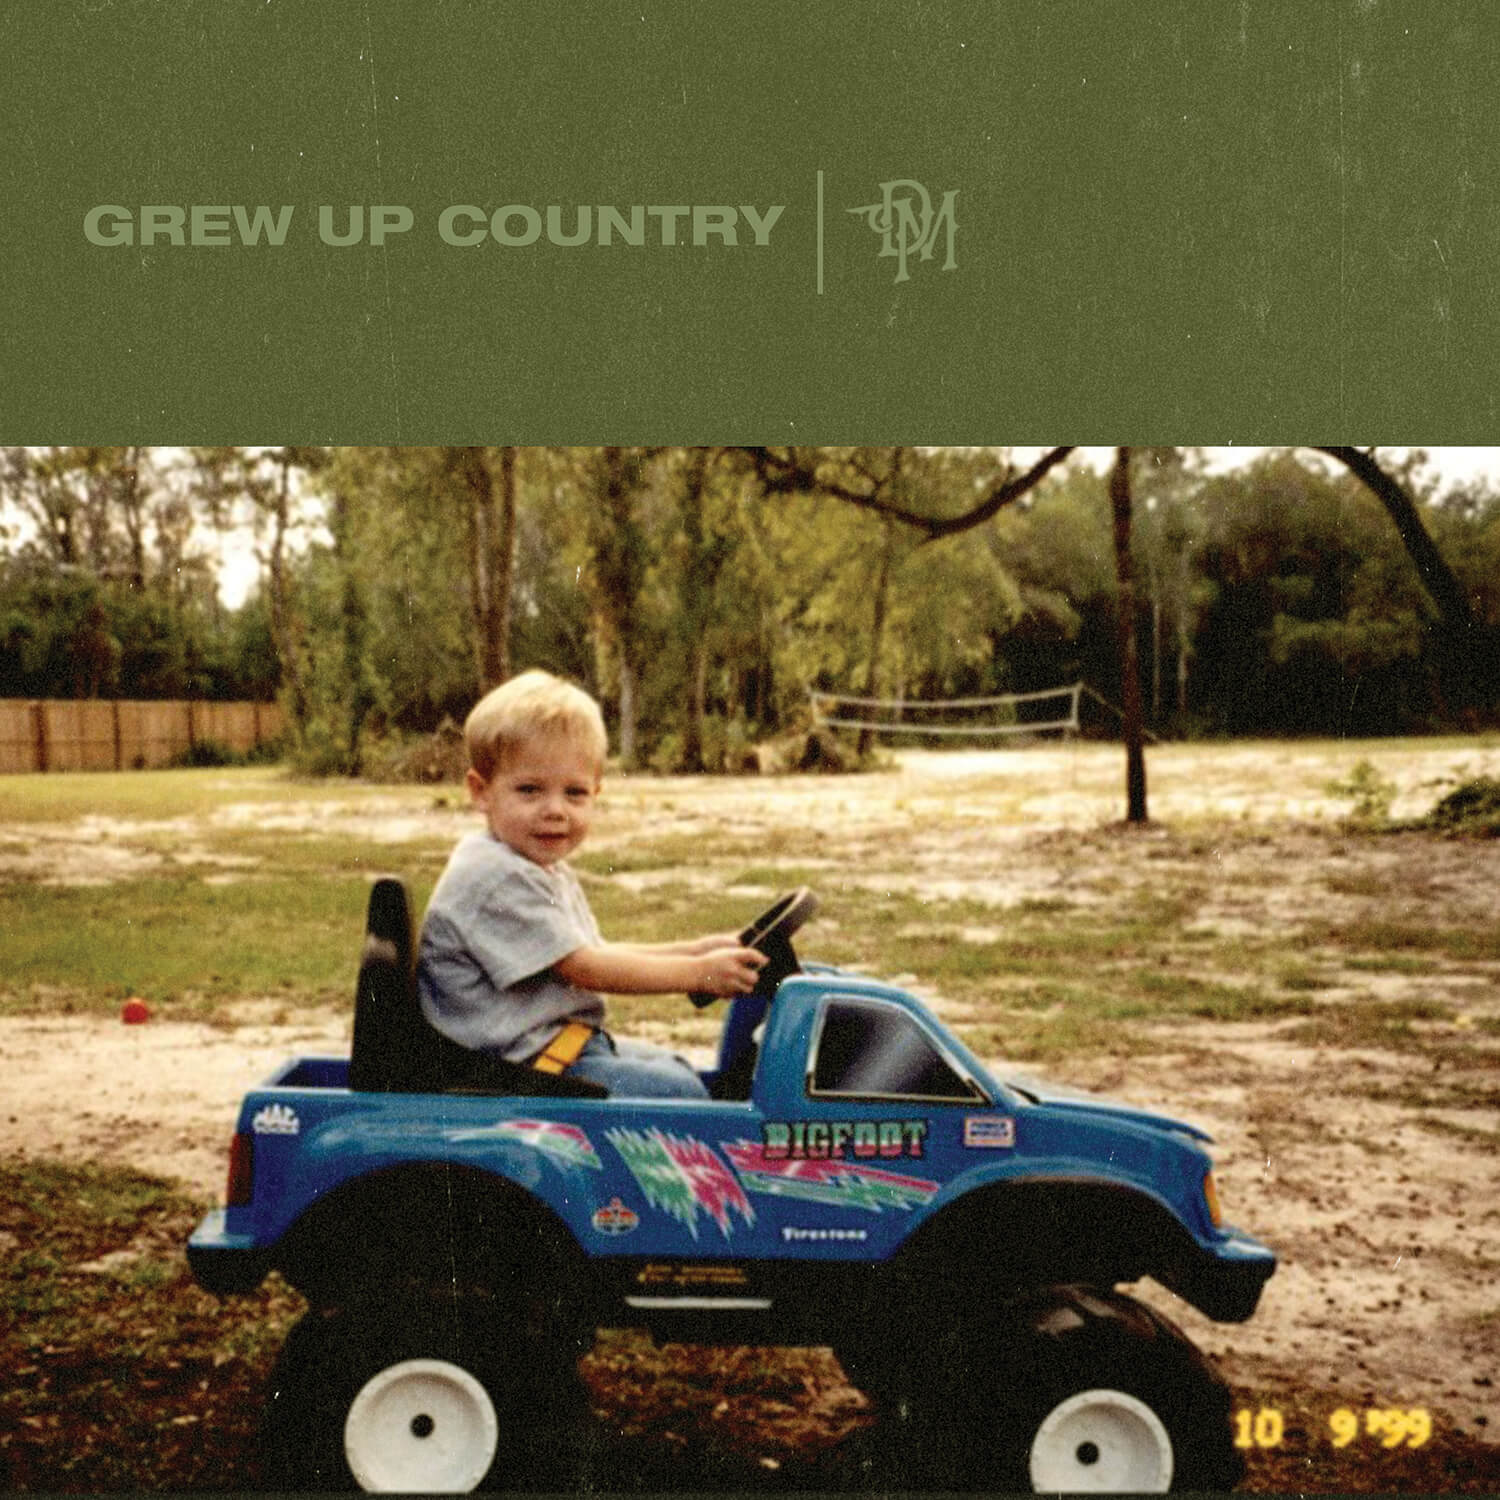 Grew Up Country 2-pack